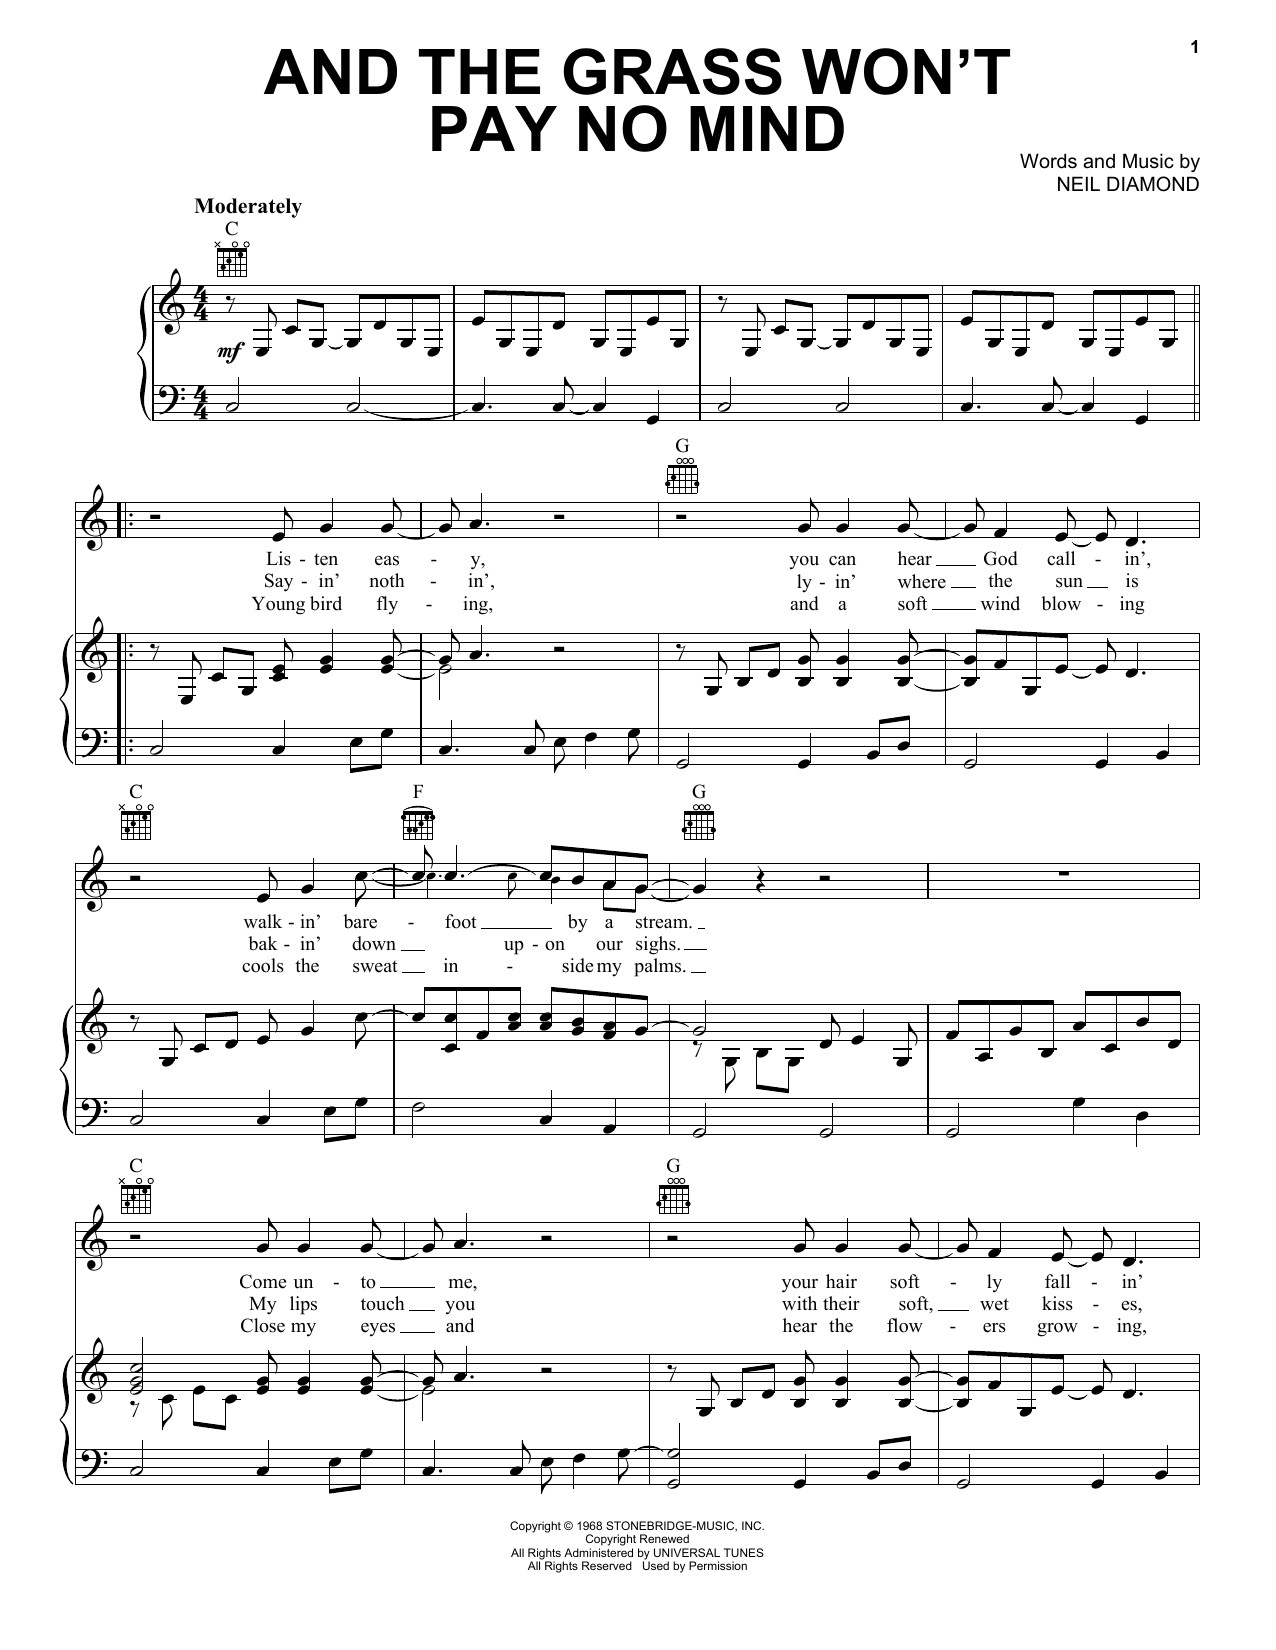 Download Elvis Presley And The Grass Won't Pay No Mind Sheet Music